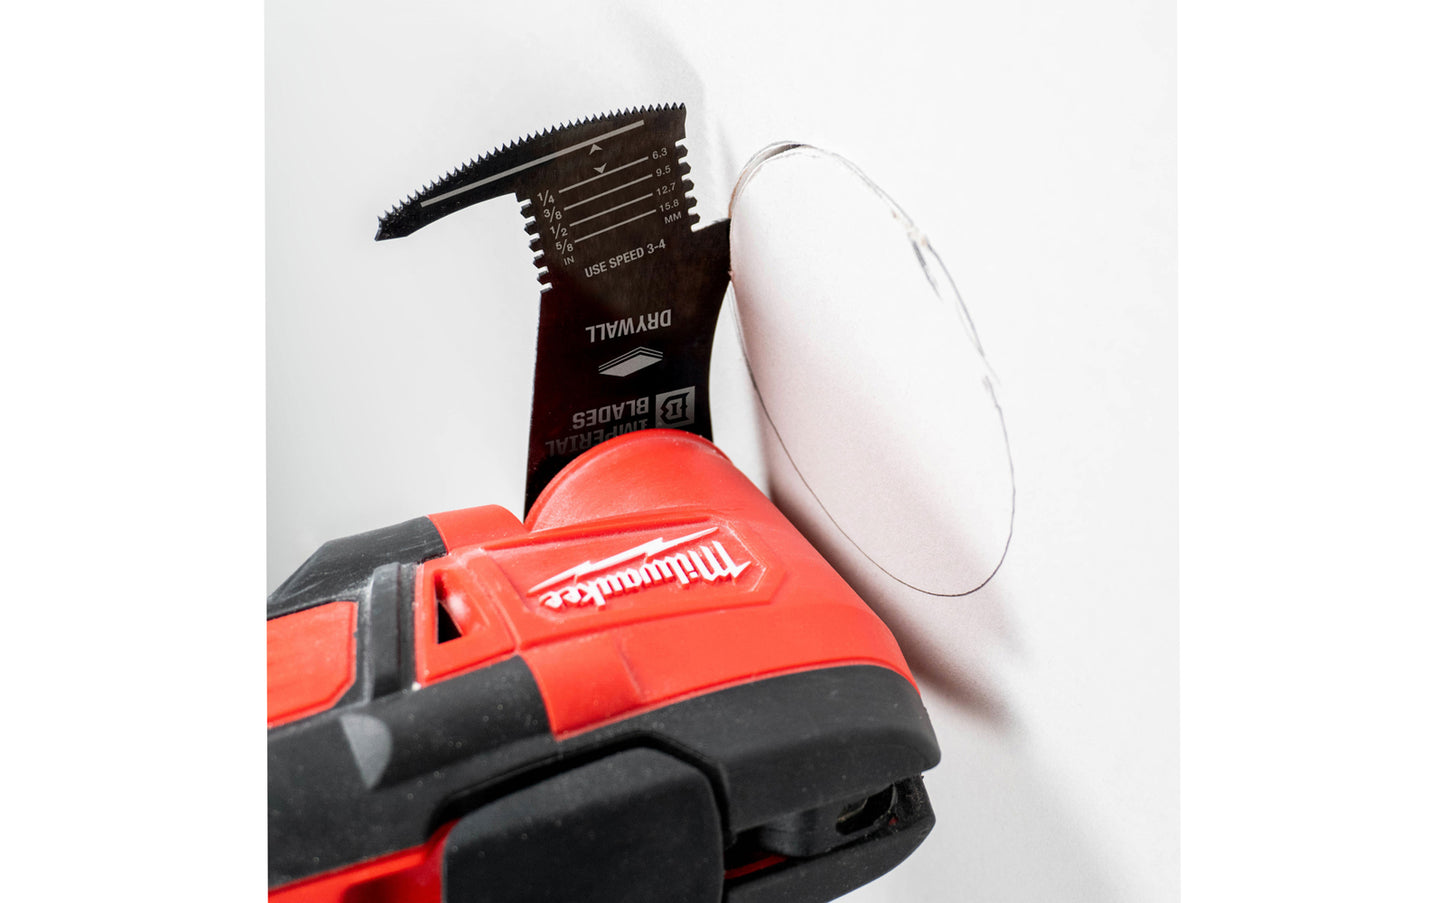 Imperial Blades "One Fit" 4-in-1 Features Drywall Blade